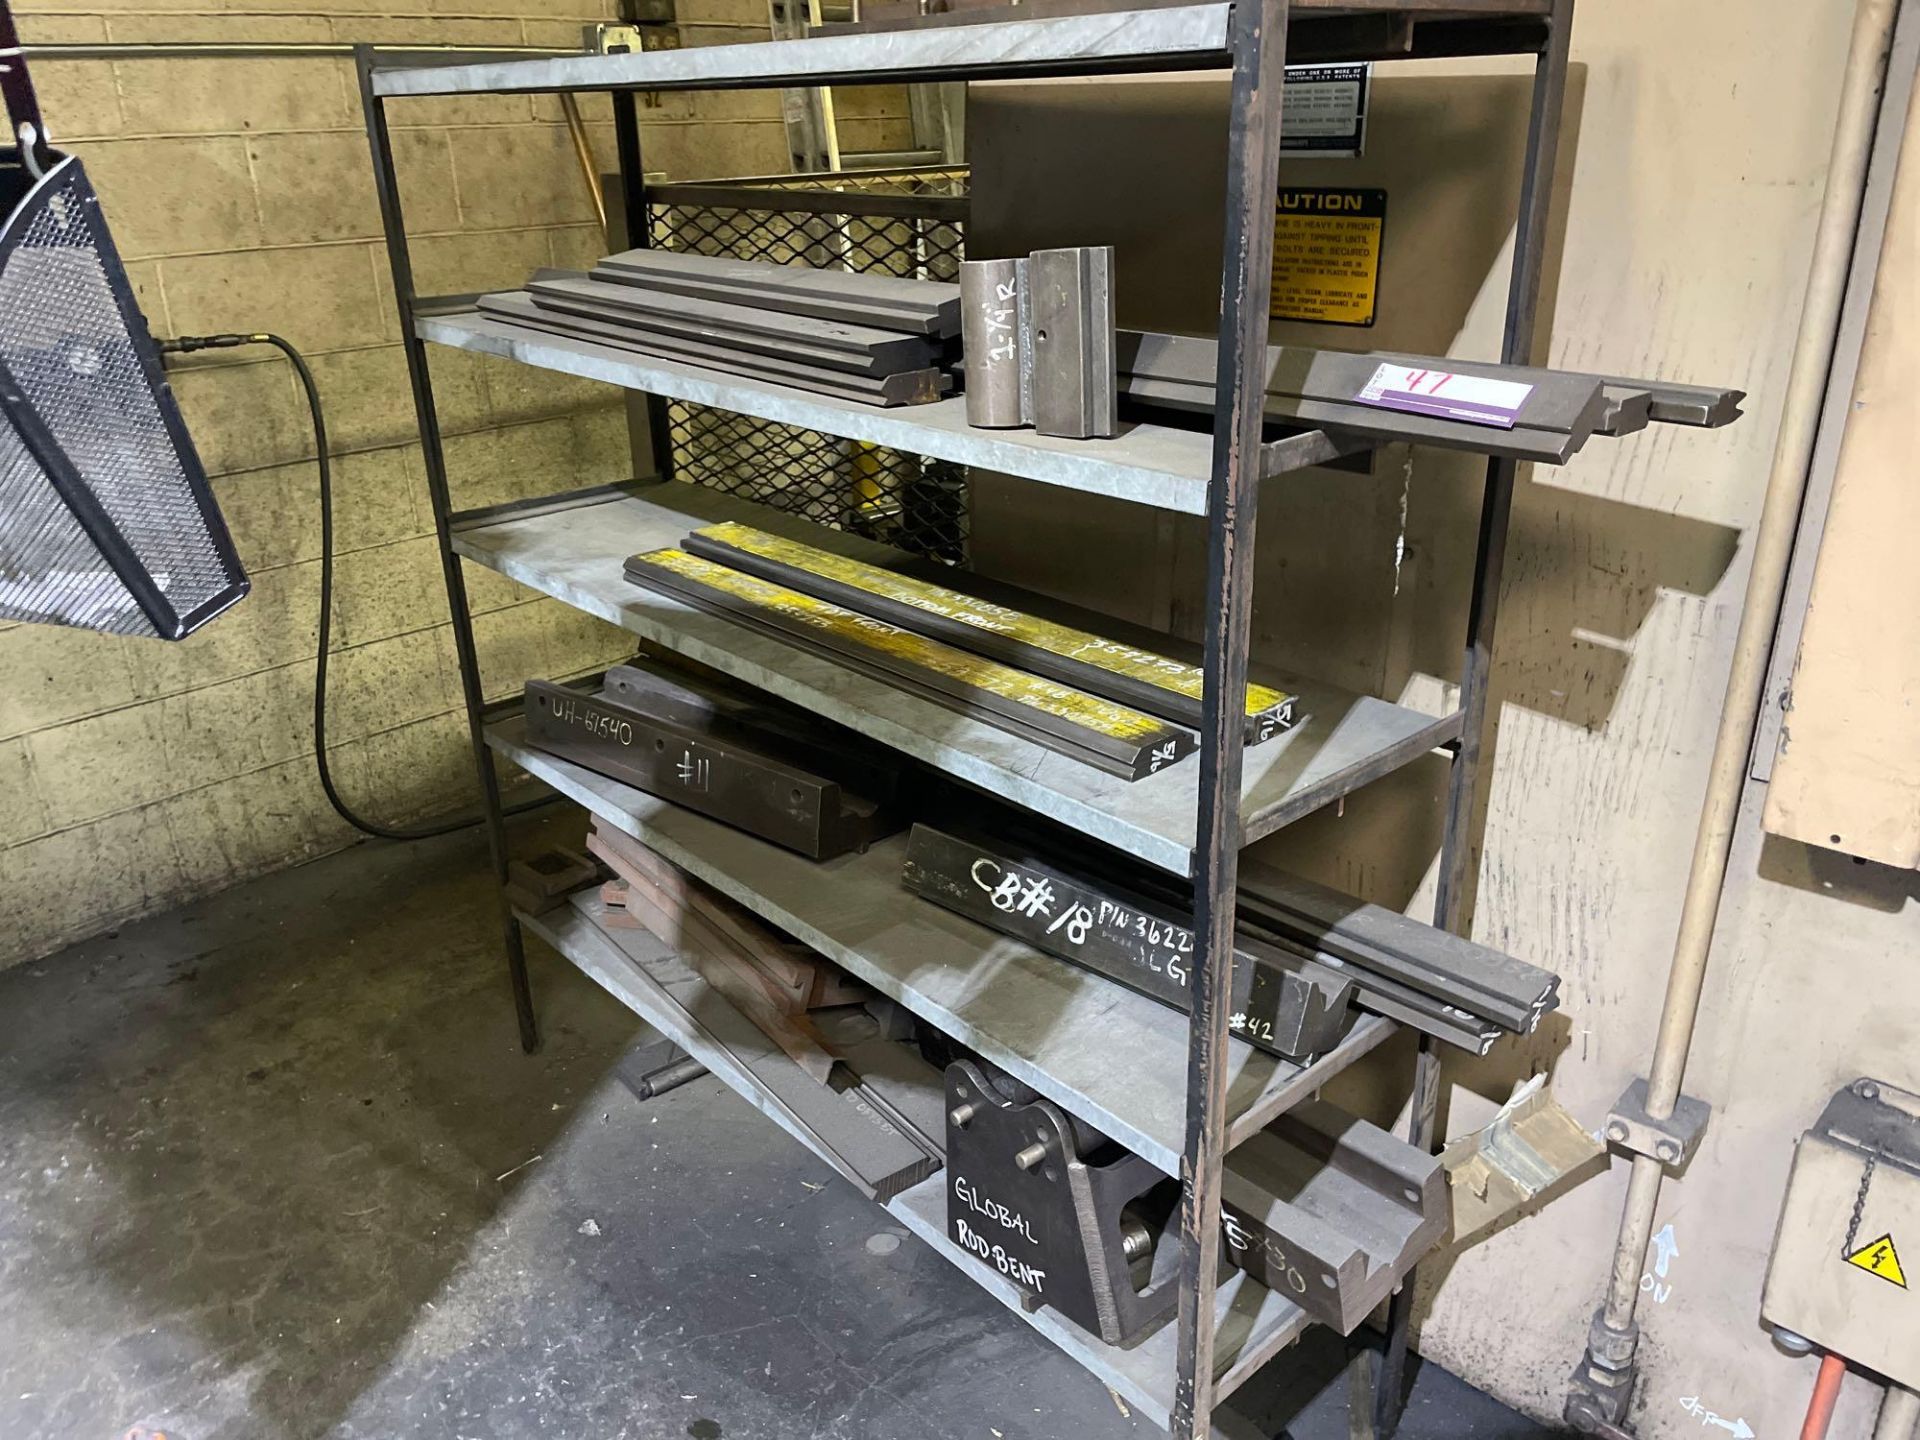 Assorted Dies for Press Brakes with Rack